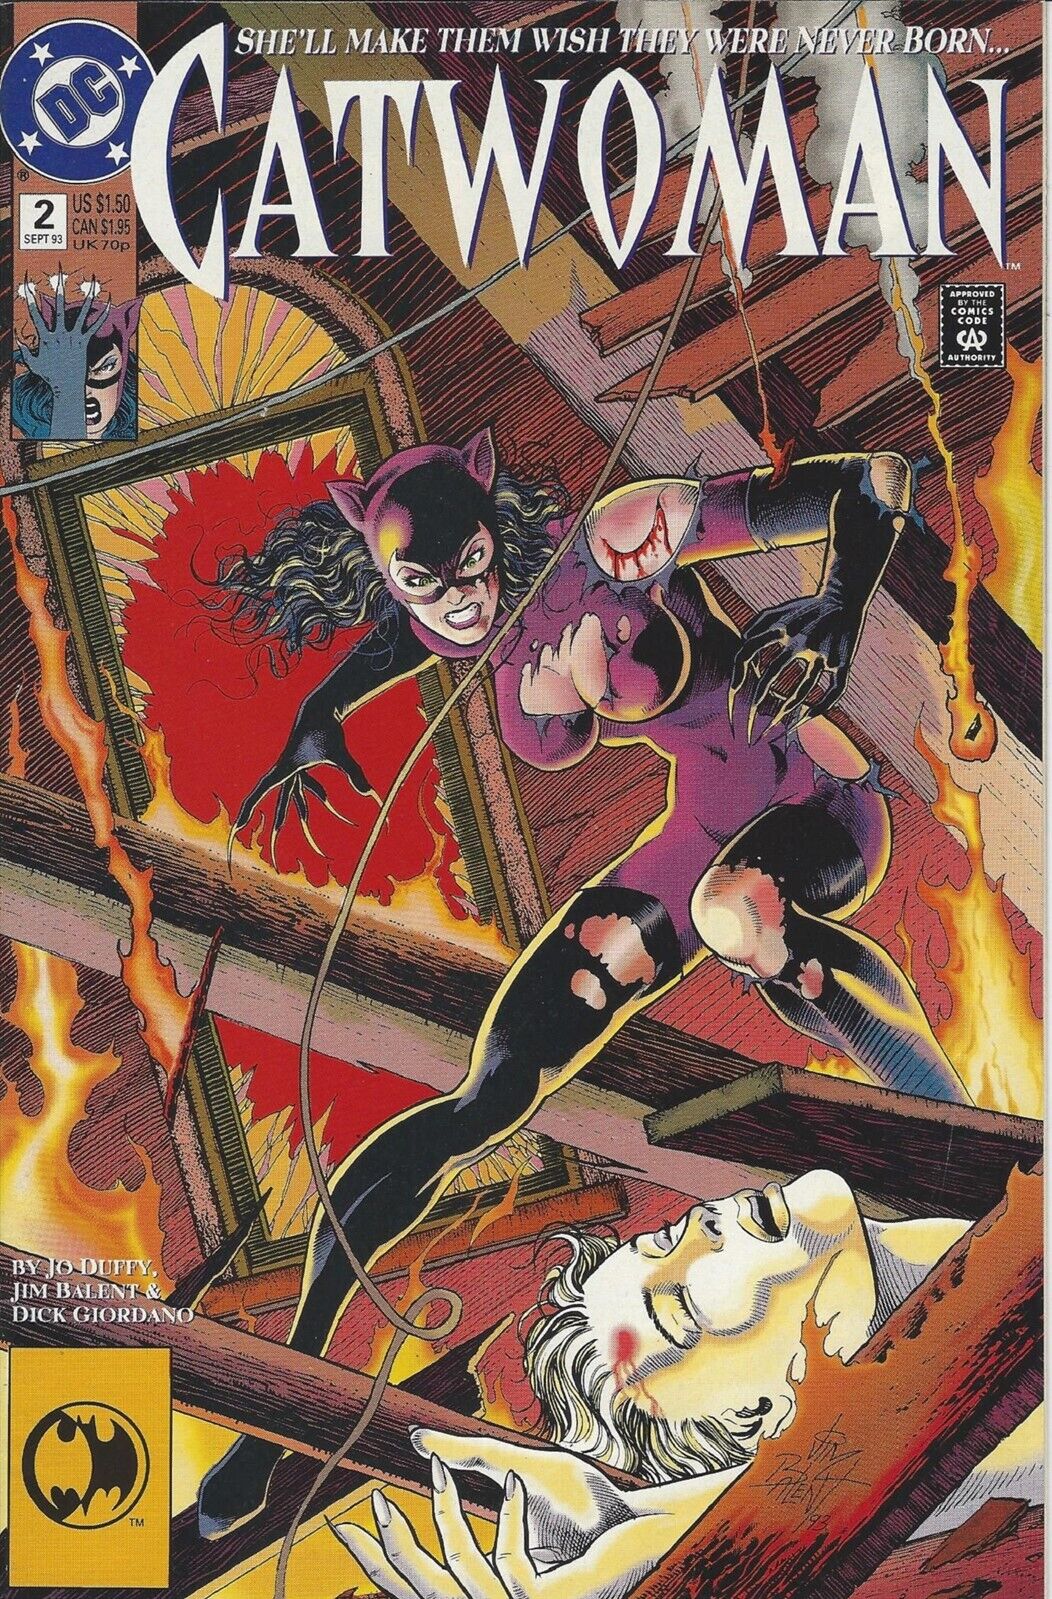 Catwoman #2 Life Lines Chapter Two: Blast From the Past